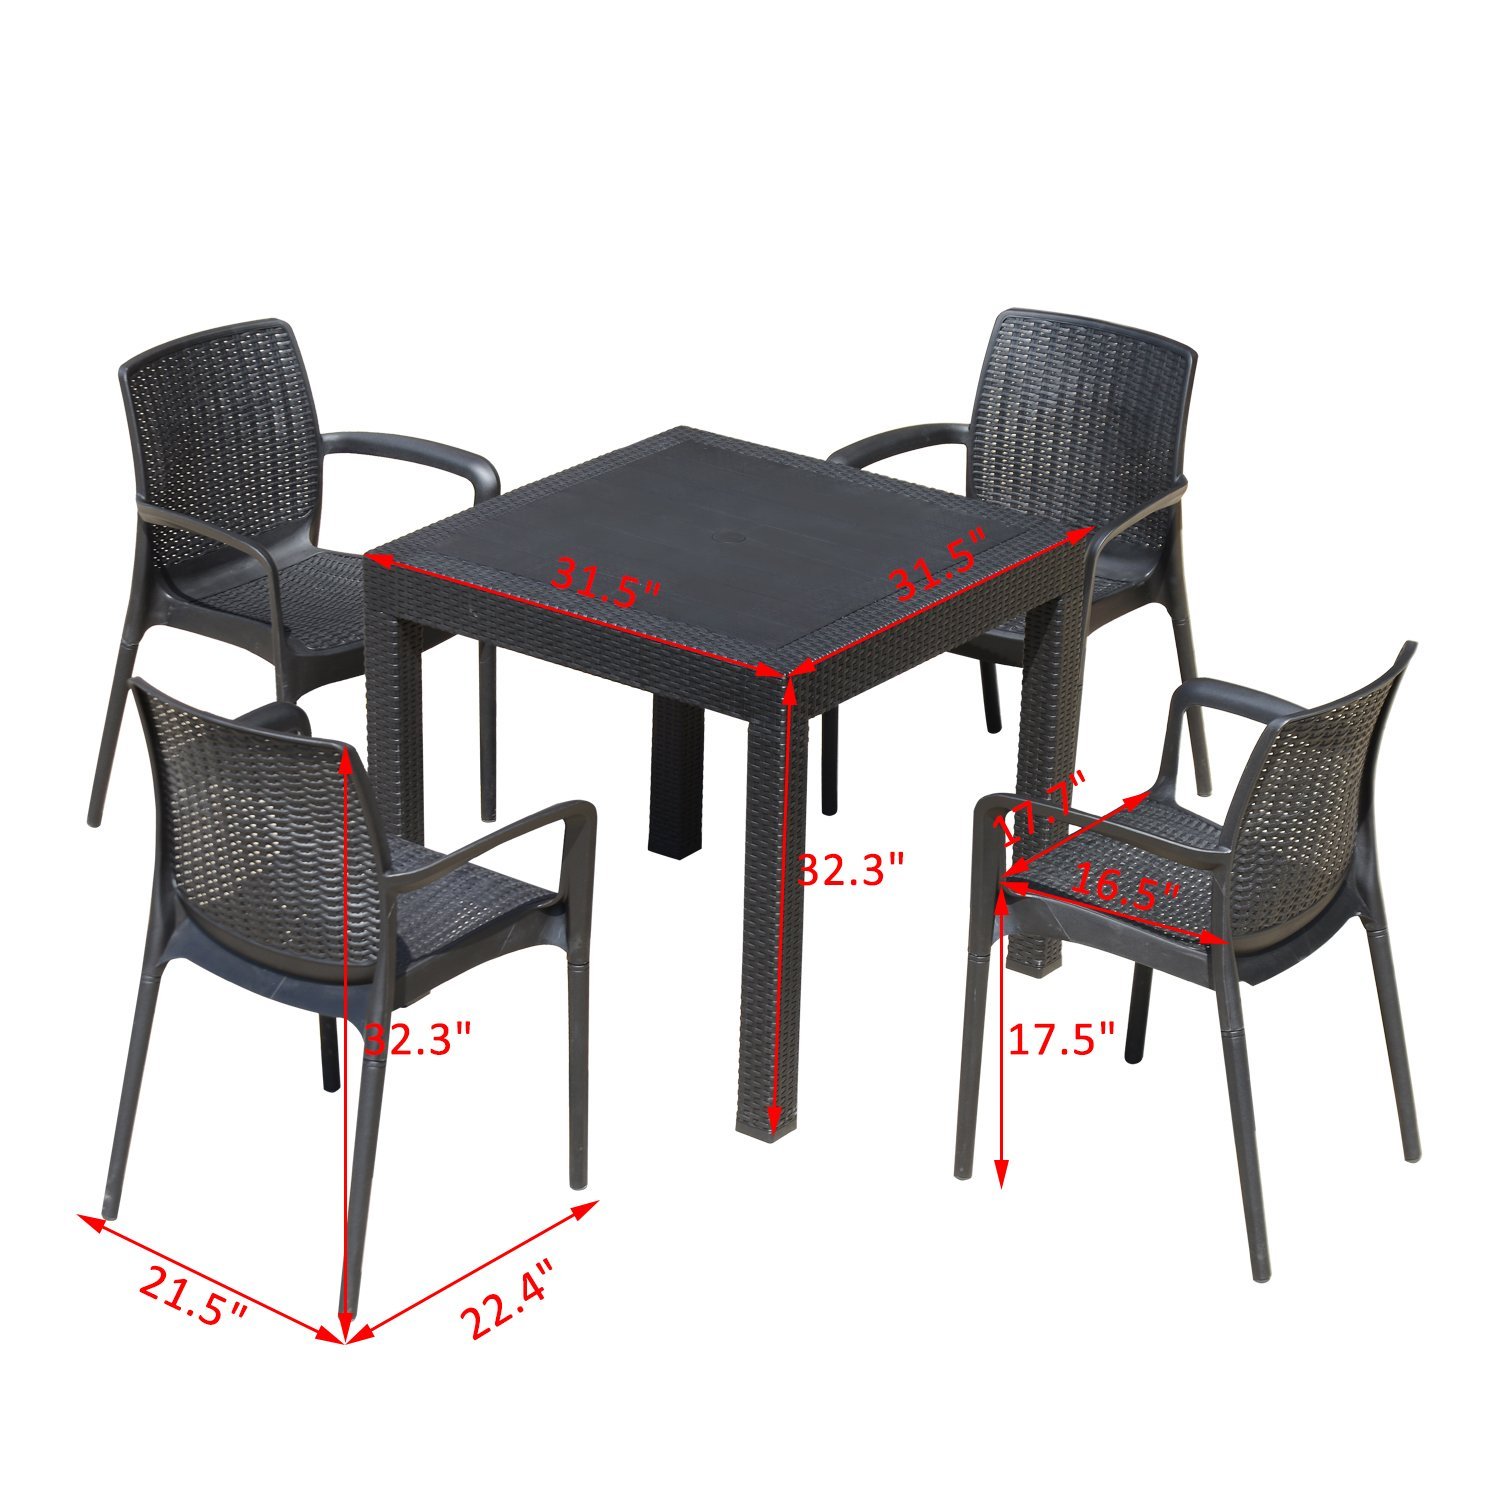 Outsunny 5pc All Weather Resin Patio Dining Set Garden ...